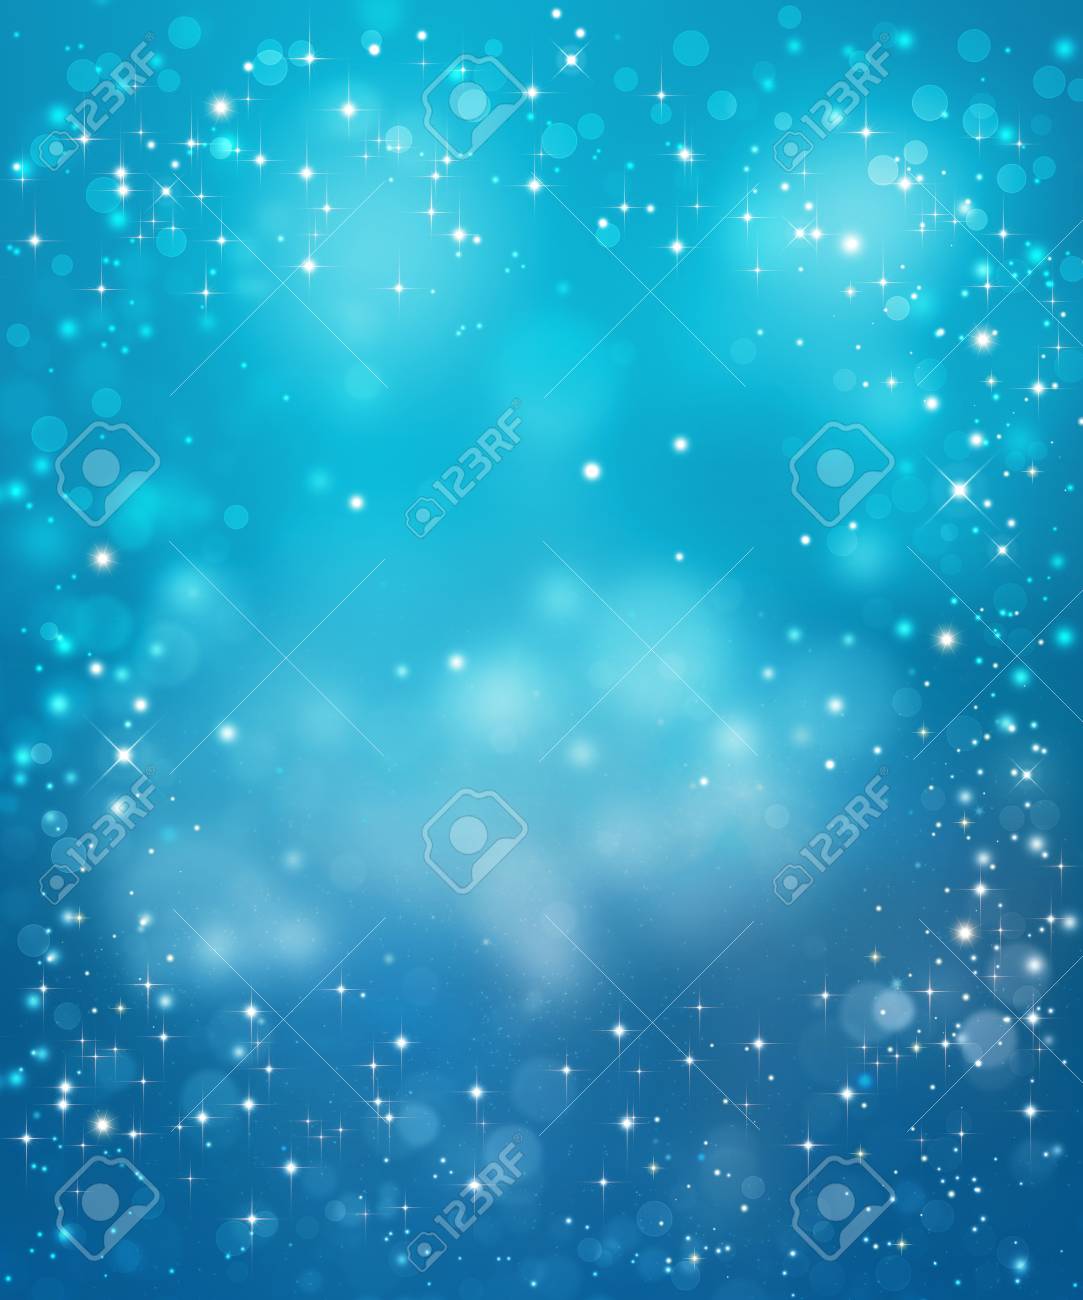 Beautiful Blue Festive Background Stock Photo Picture And Royalty